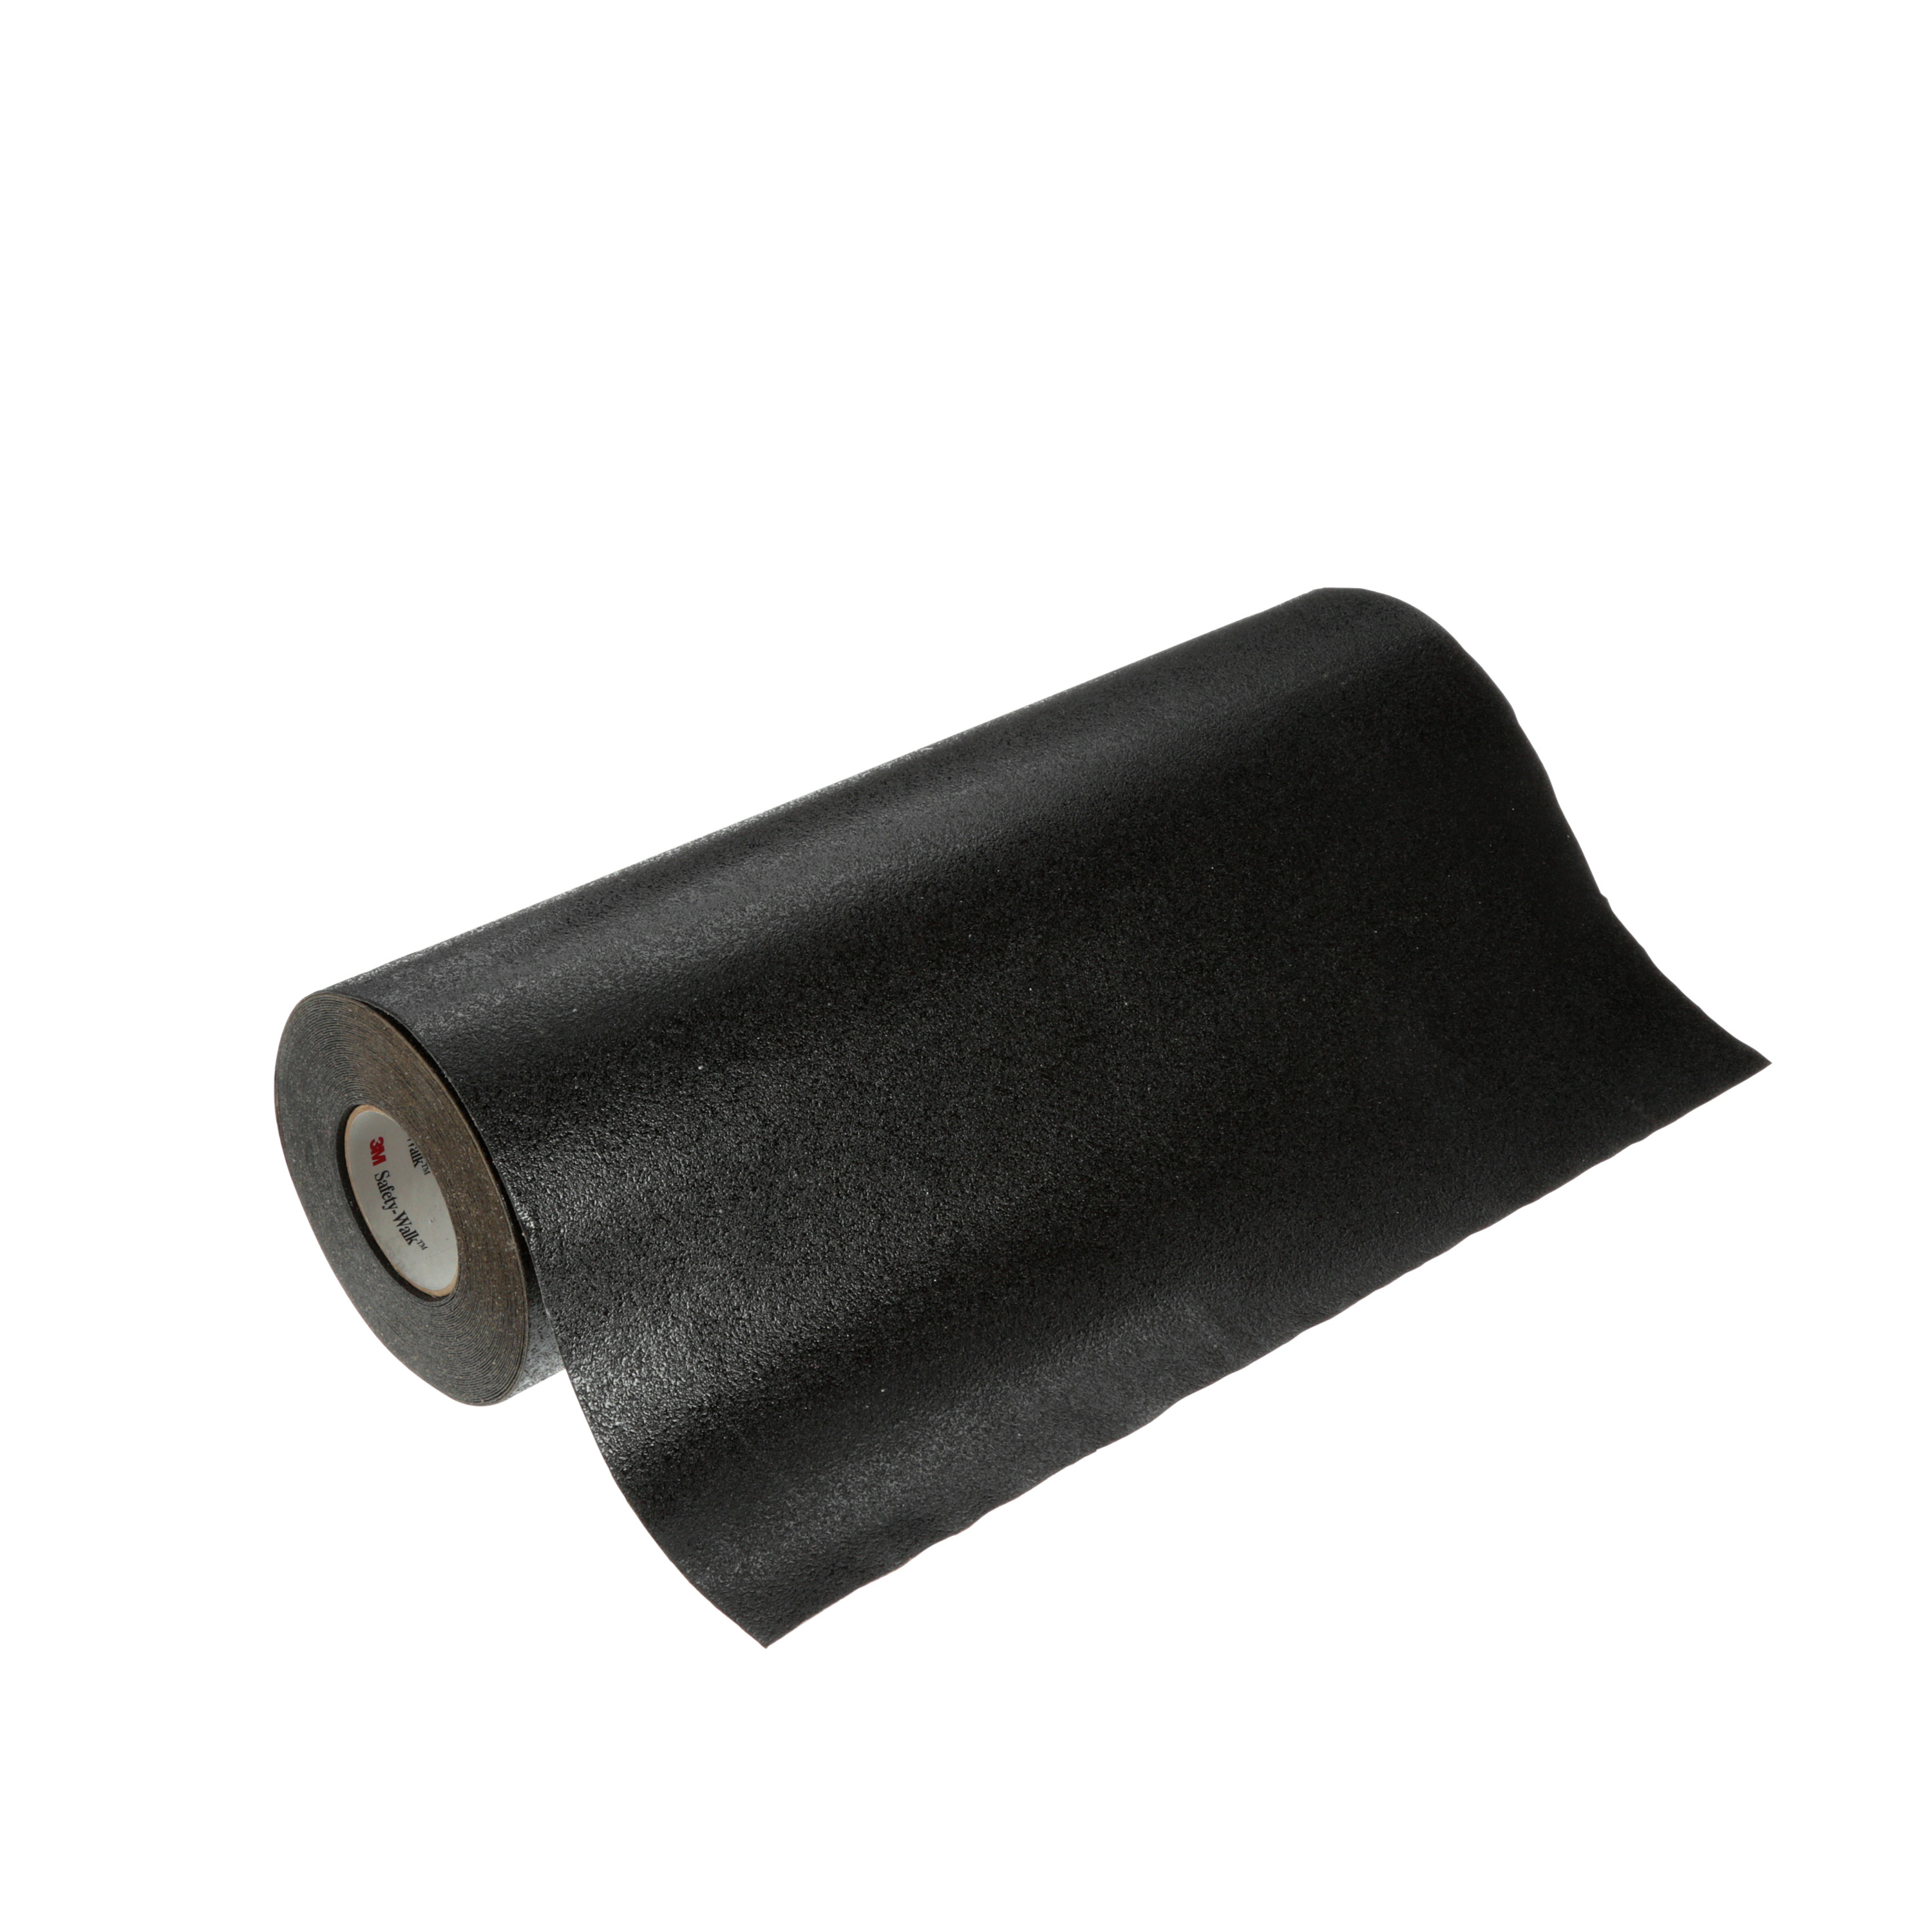 3M™ Safety-Walk™ Slip-Resistant Conformable Tapes & Treads 510, Black,
24 in x 60 ft, Roll, 1/Case